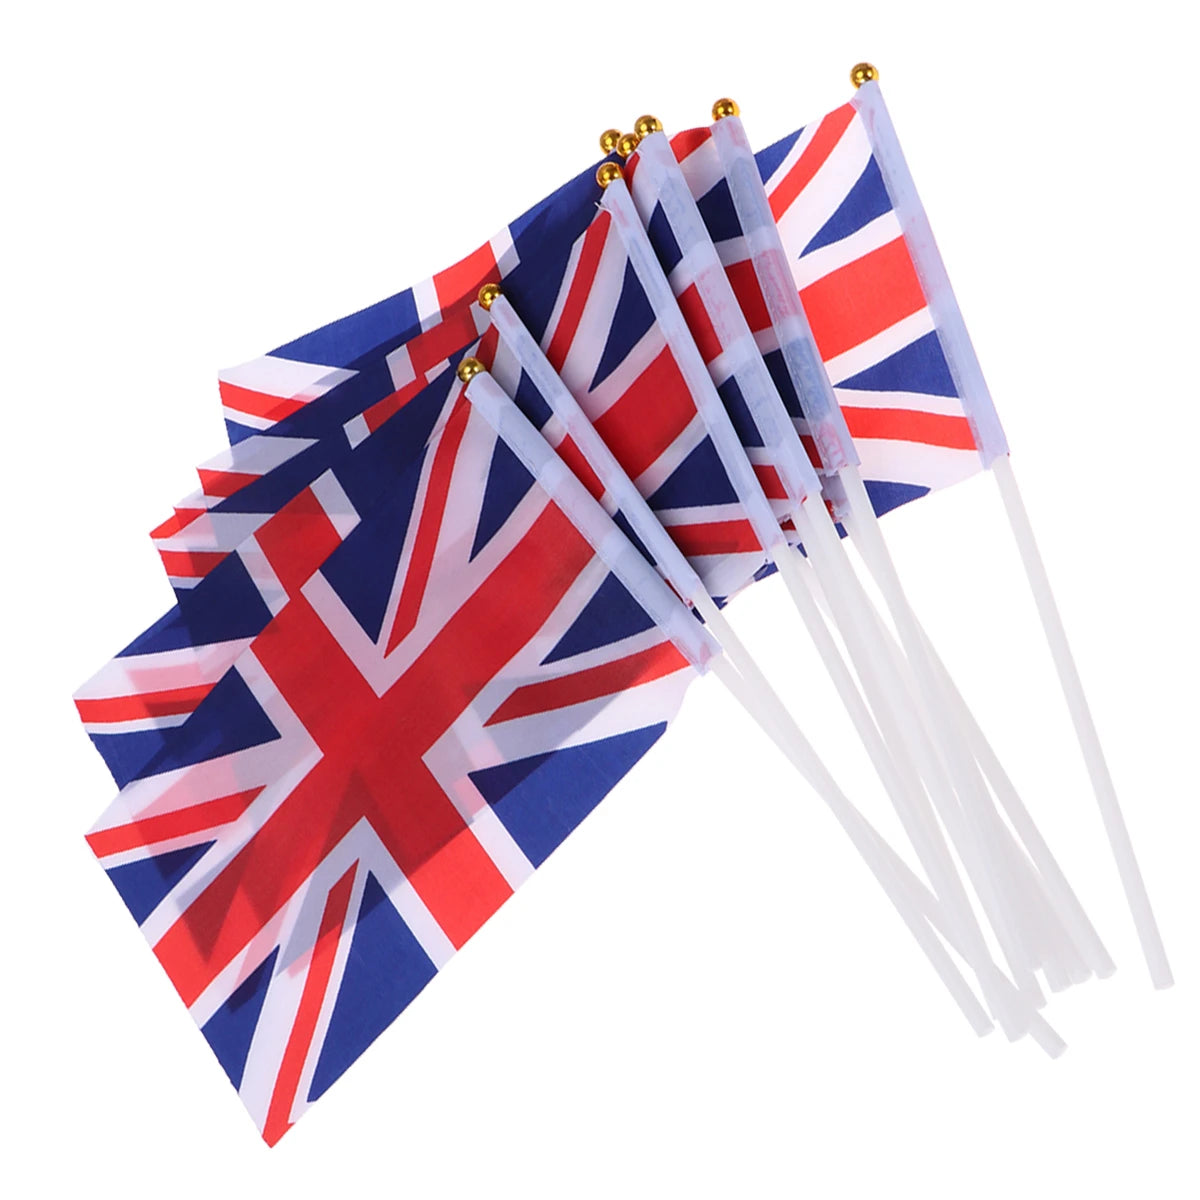 Koast Hand Held Union Jack Flag Pack Of 5 Accessories ONE SIZE / Blue